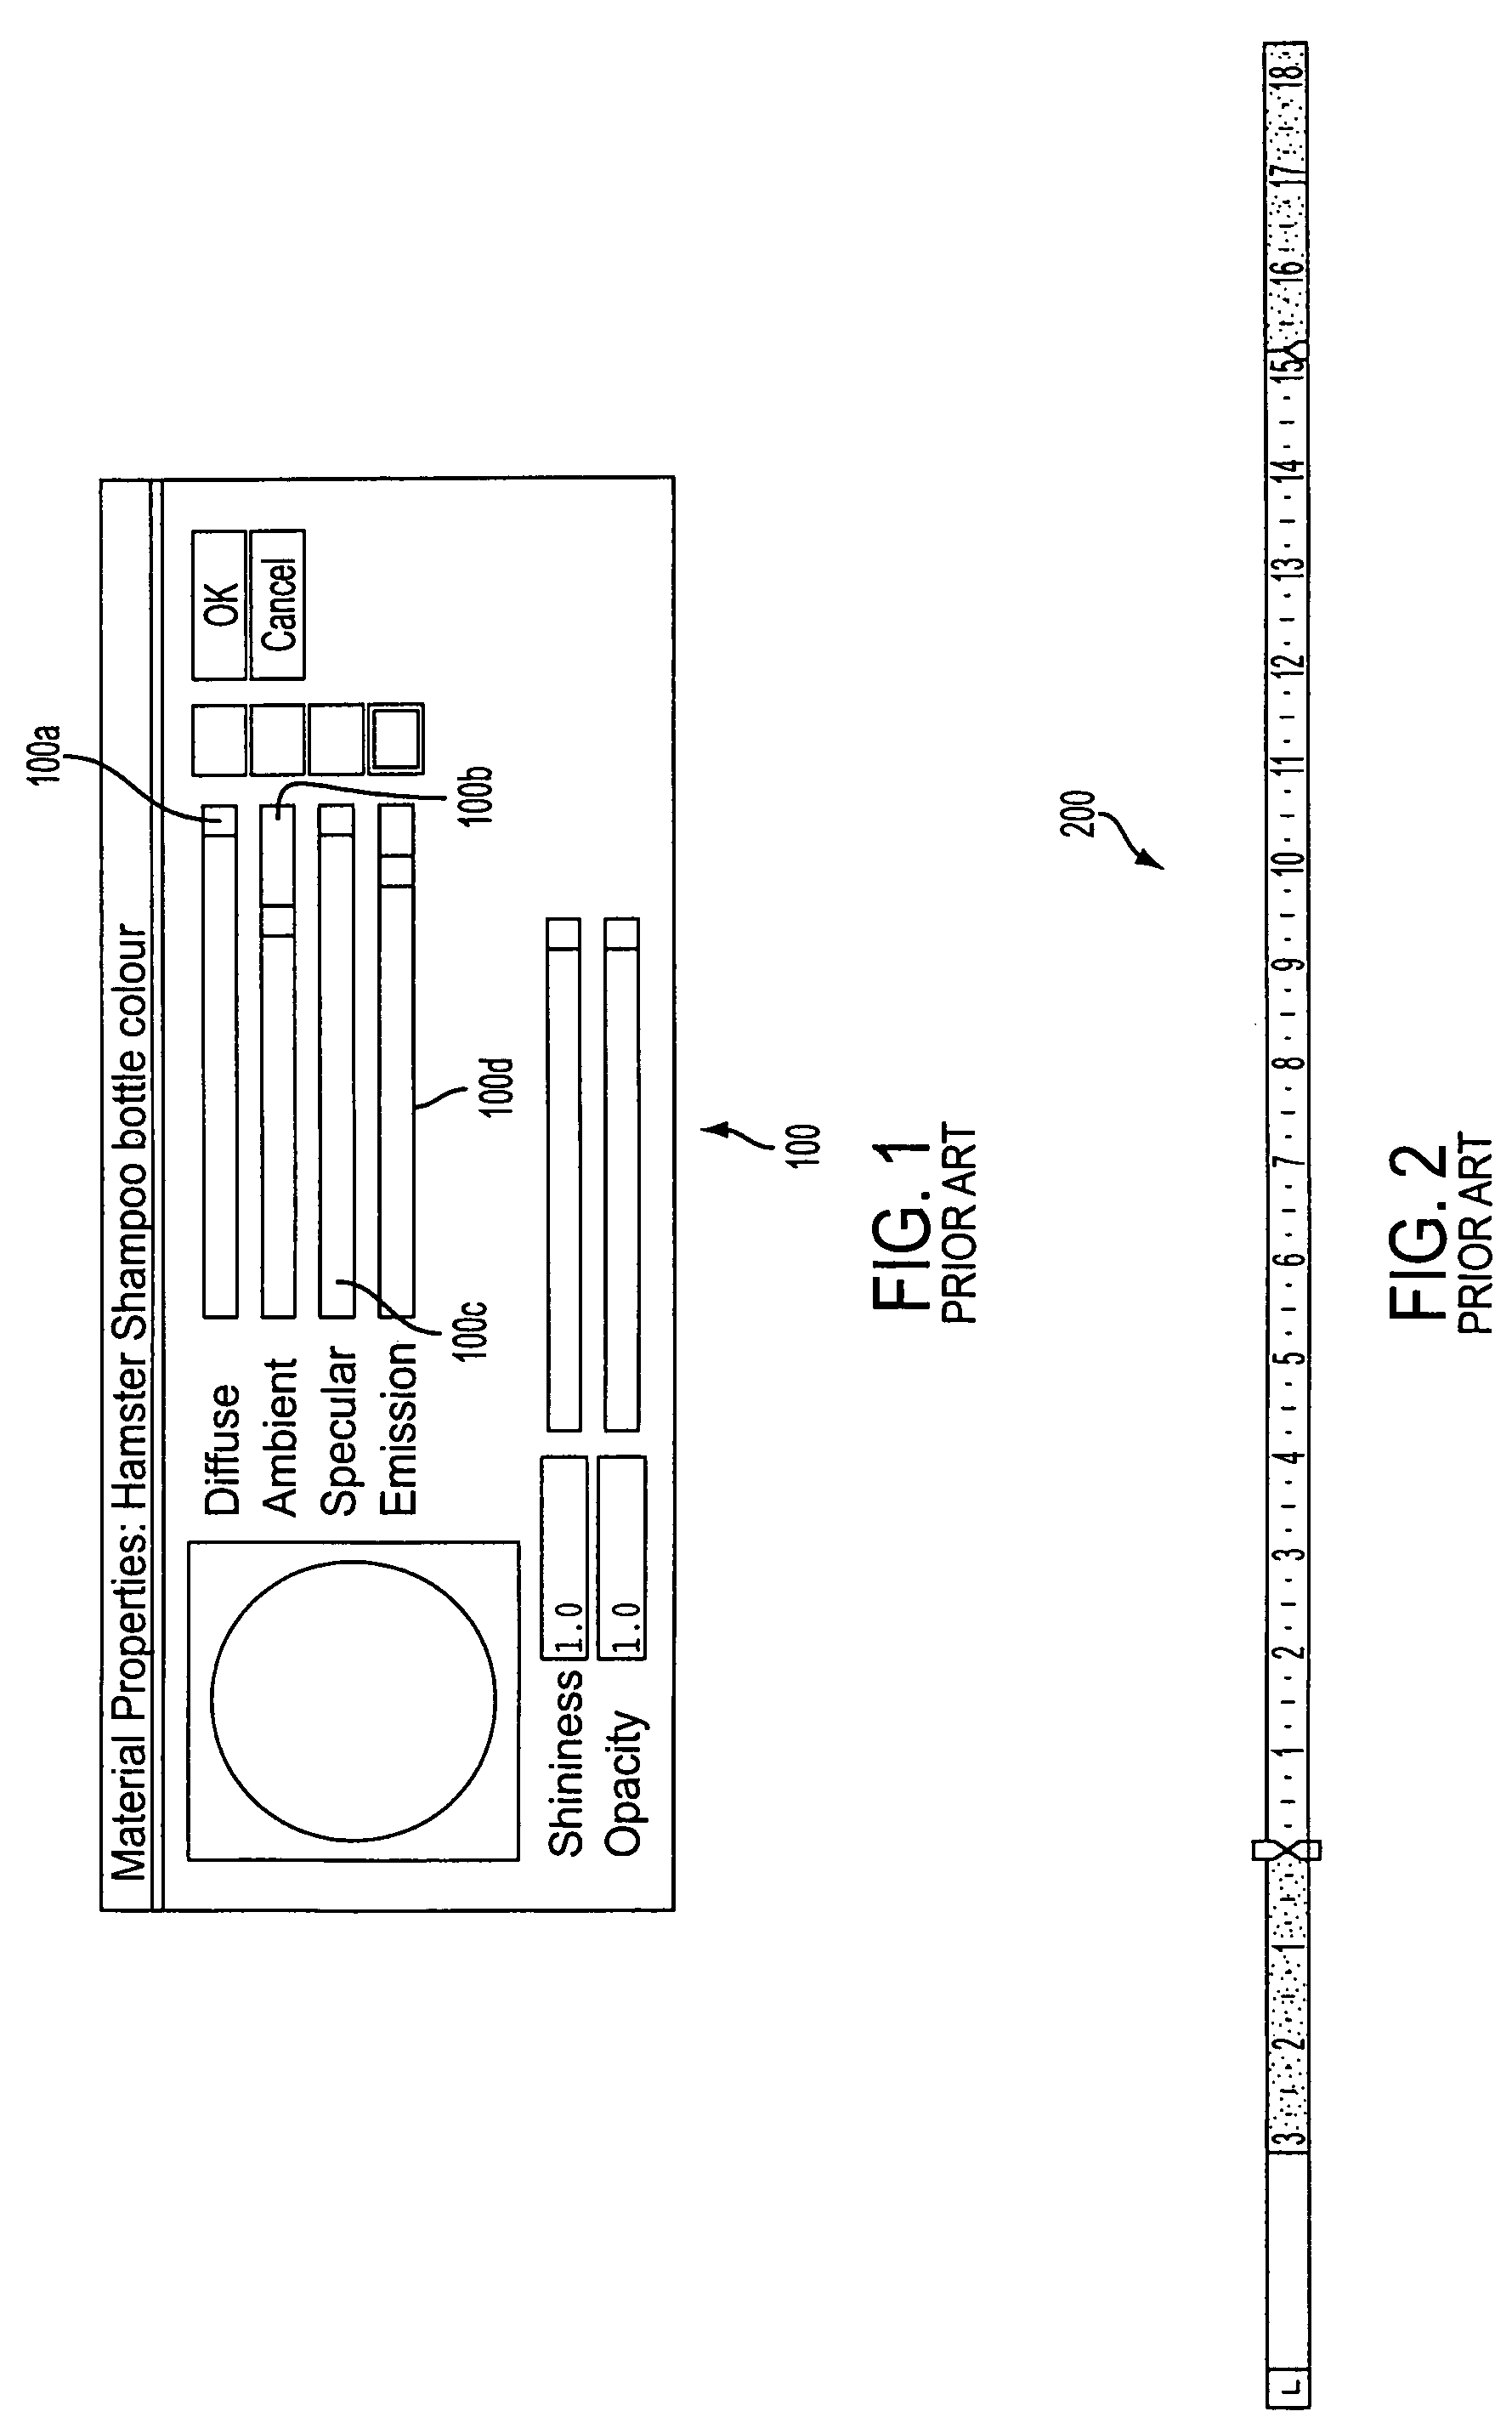 Method and apparatus of choosing ranges from a scale of values in a user interface